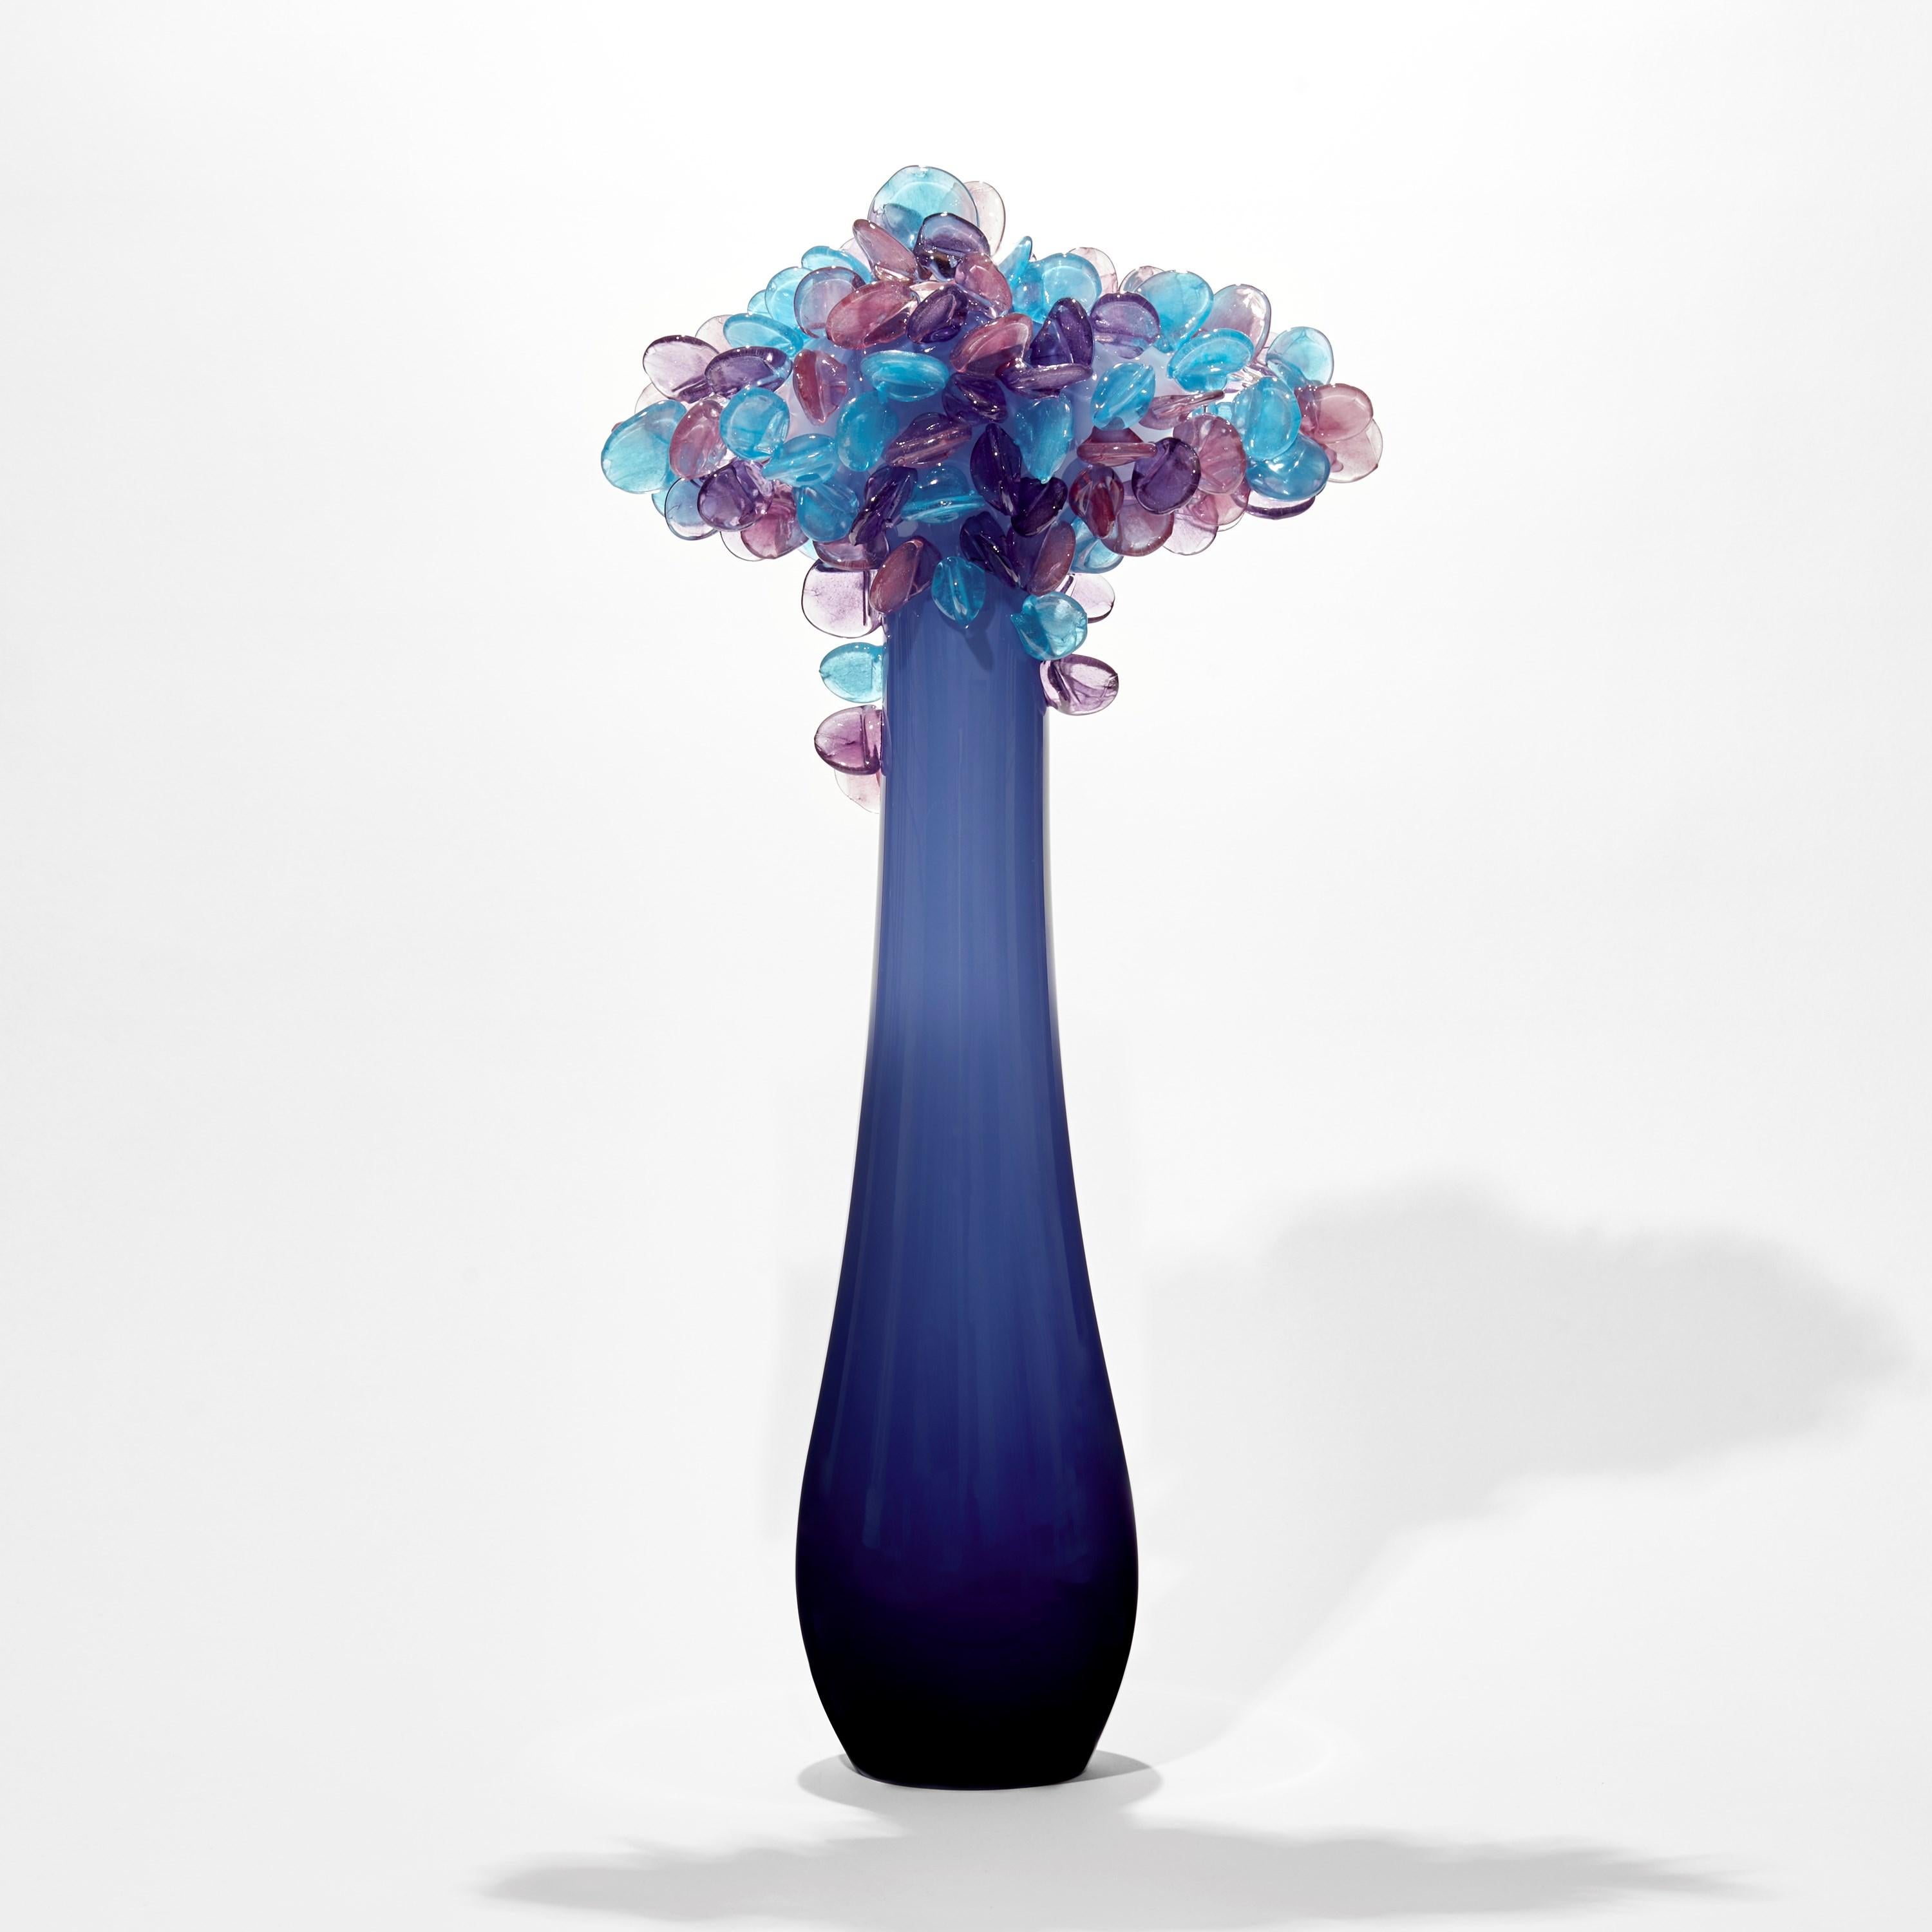 'Enchanted Dawn in Iron Blue' is a unique glass tree sculpture by the British artist, Louis Thompson.

With both his Enchanted Dawn and Dusk collections, Thompson brings a joyous and playful element to his glass. Gracious sweeping trunks are